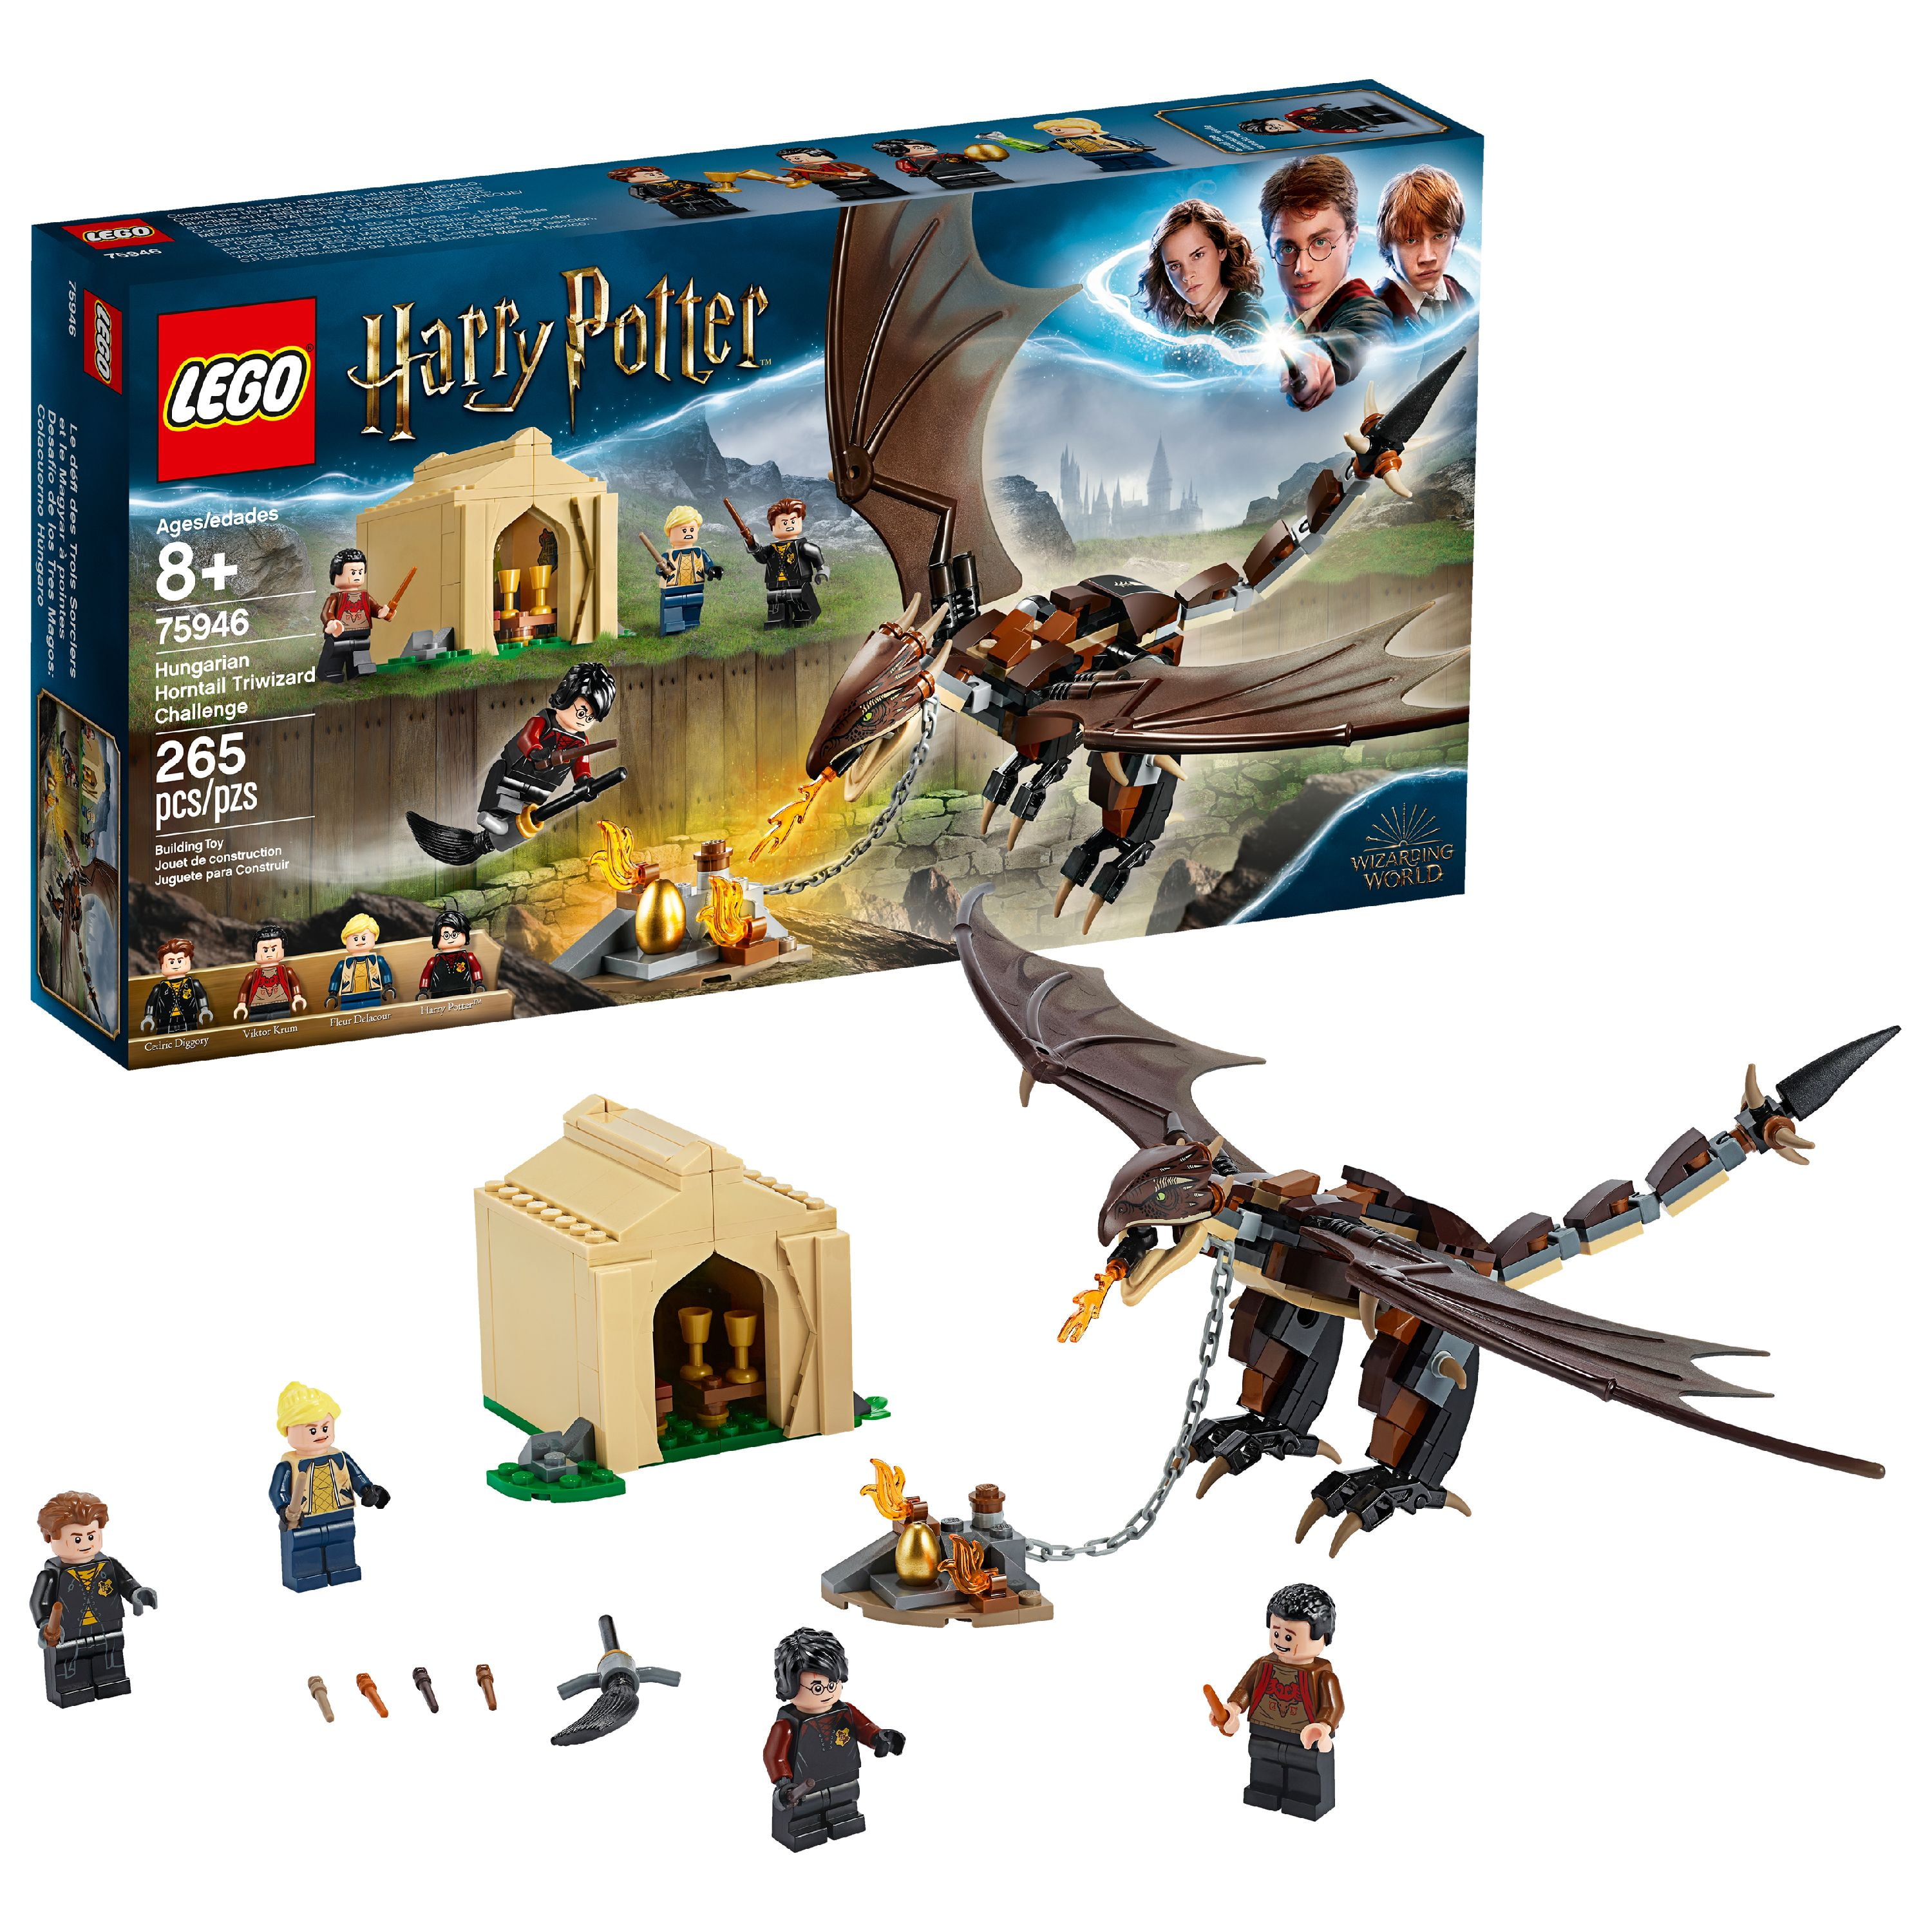  LEGO Harry Potter: Years 1-4 : Toys & Games